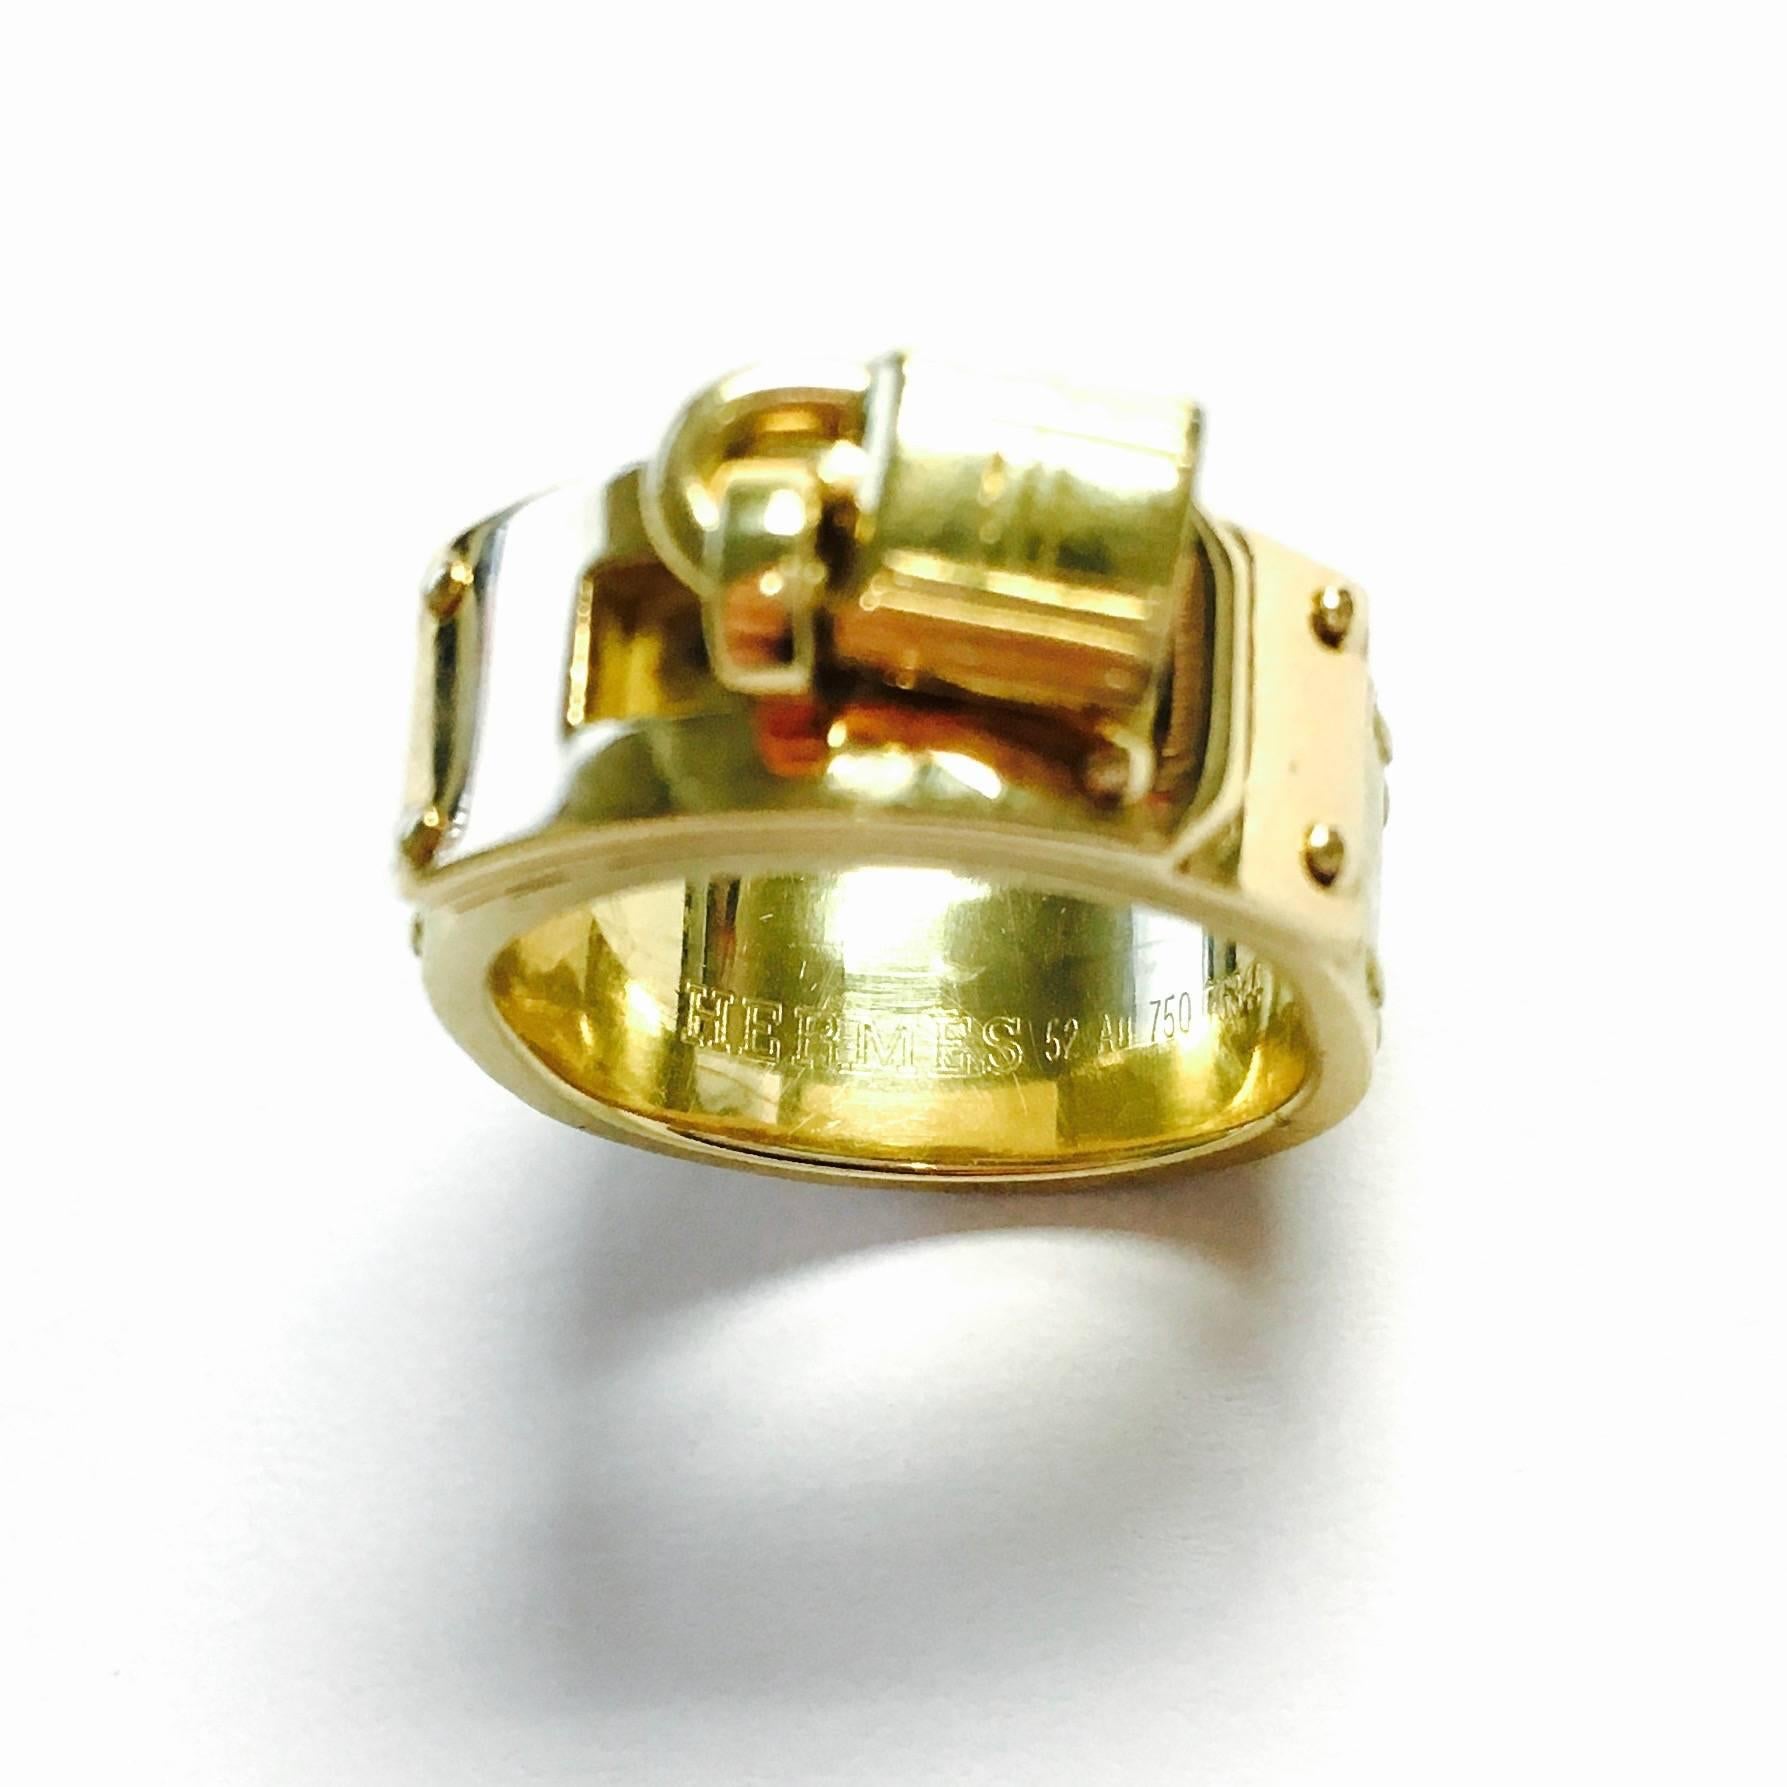 Crafted from solid 18kt yellow gold in a polished and satin finish from Hermes fashion house, the 7 millimeter wide band boast a stitch design following round the the edge of the band. The front is a polished gold slide bolt with the padlock.